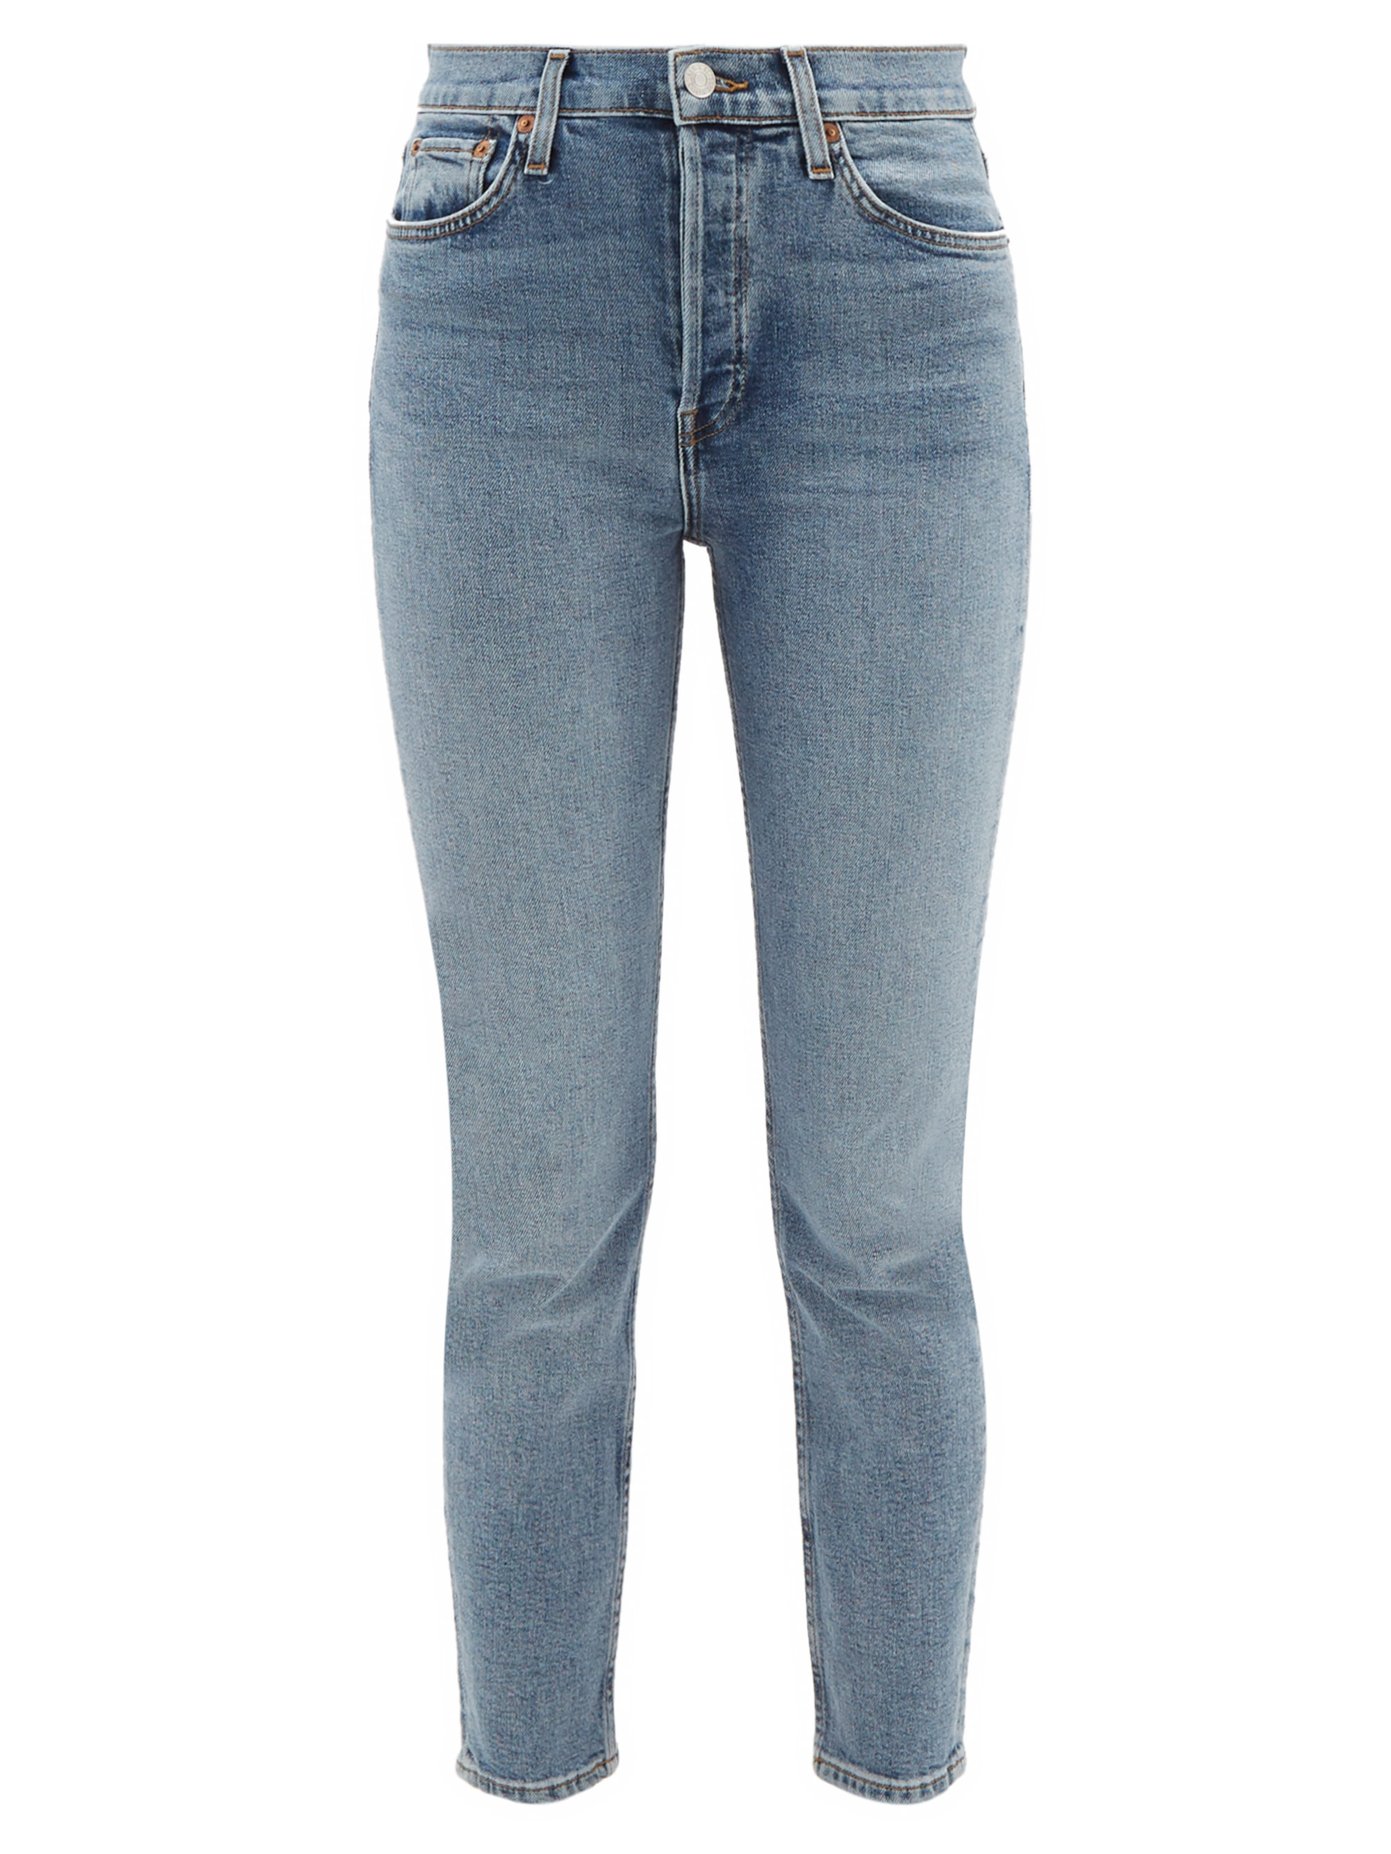 redone high rise ankle crop jeans